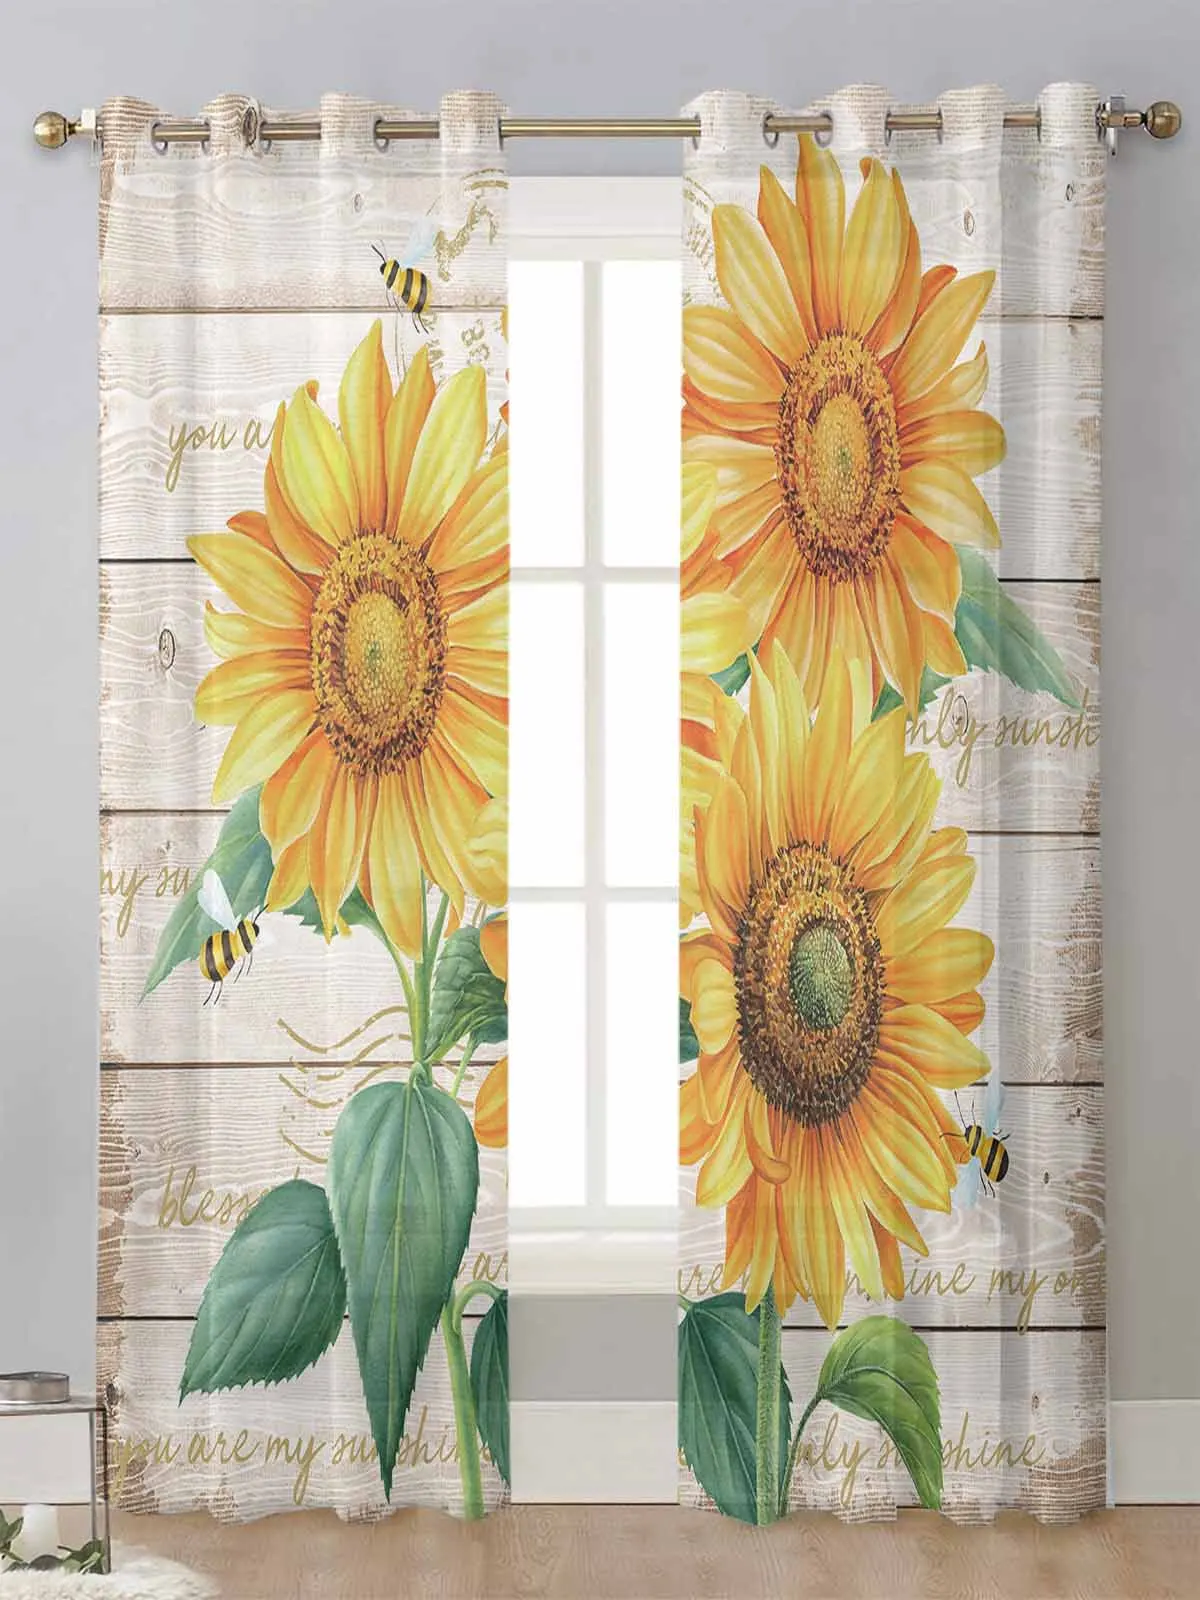 

Farm Flower Sunflower Bee Sheer Curtains For Living Room Window Transparent Voile Tulle Curtain Cortinas Drapes Home Decor